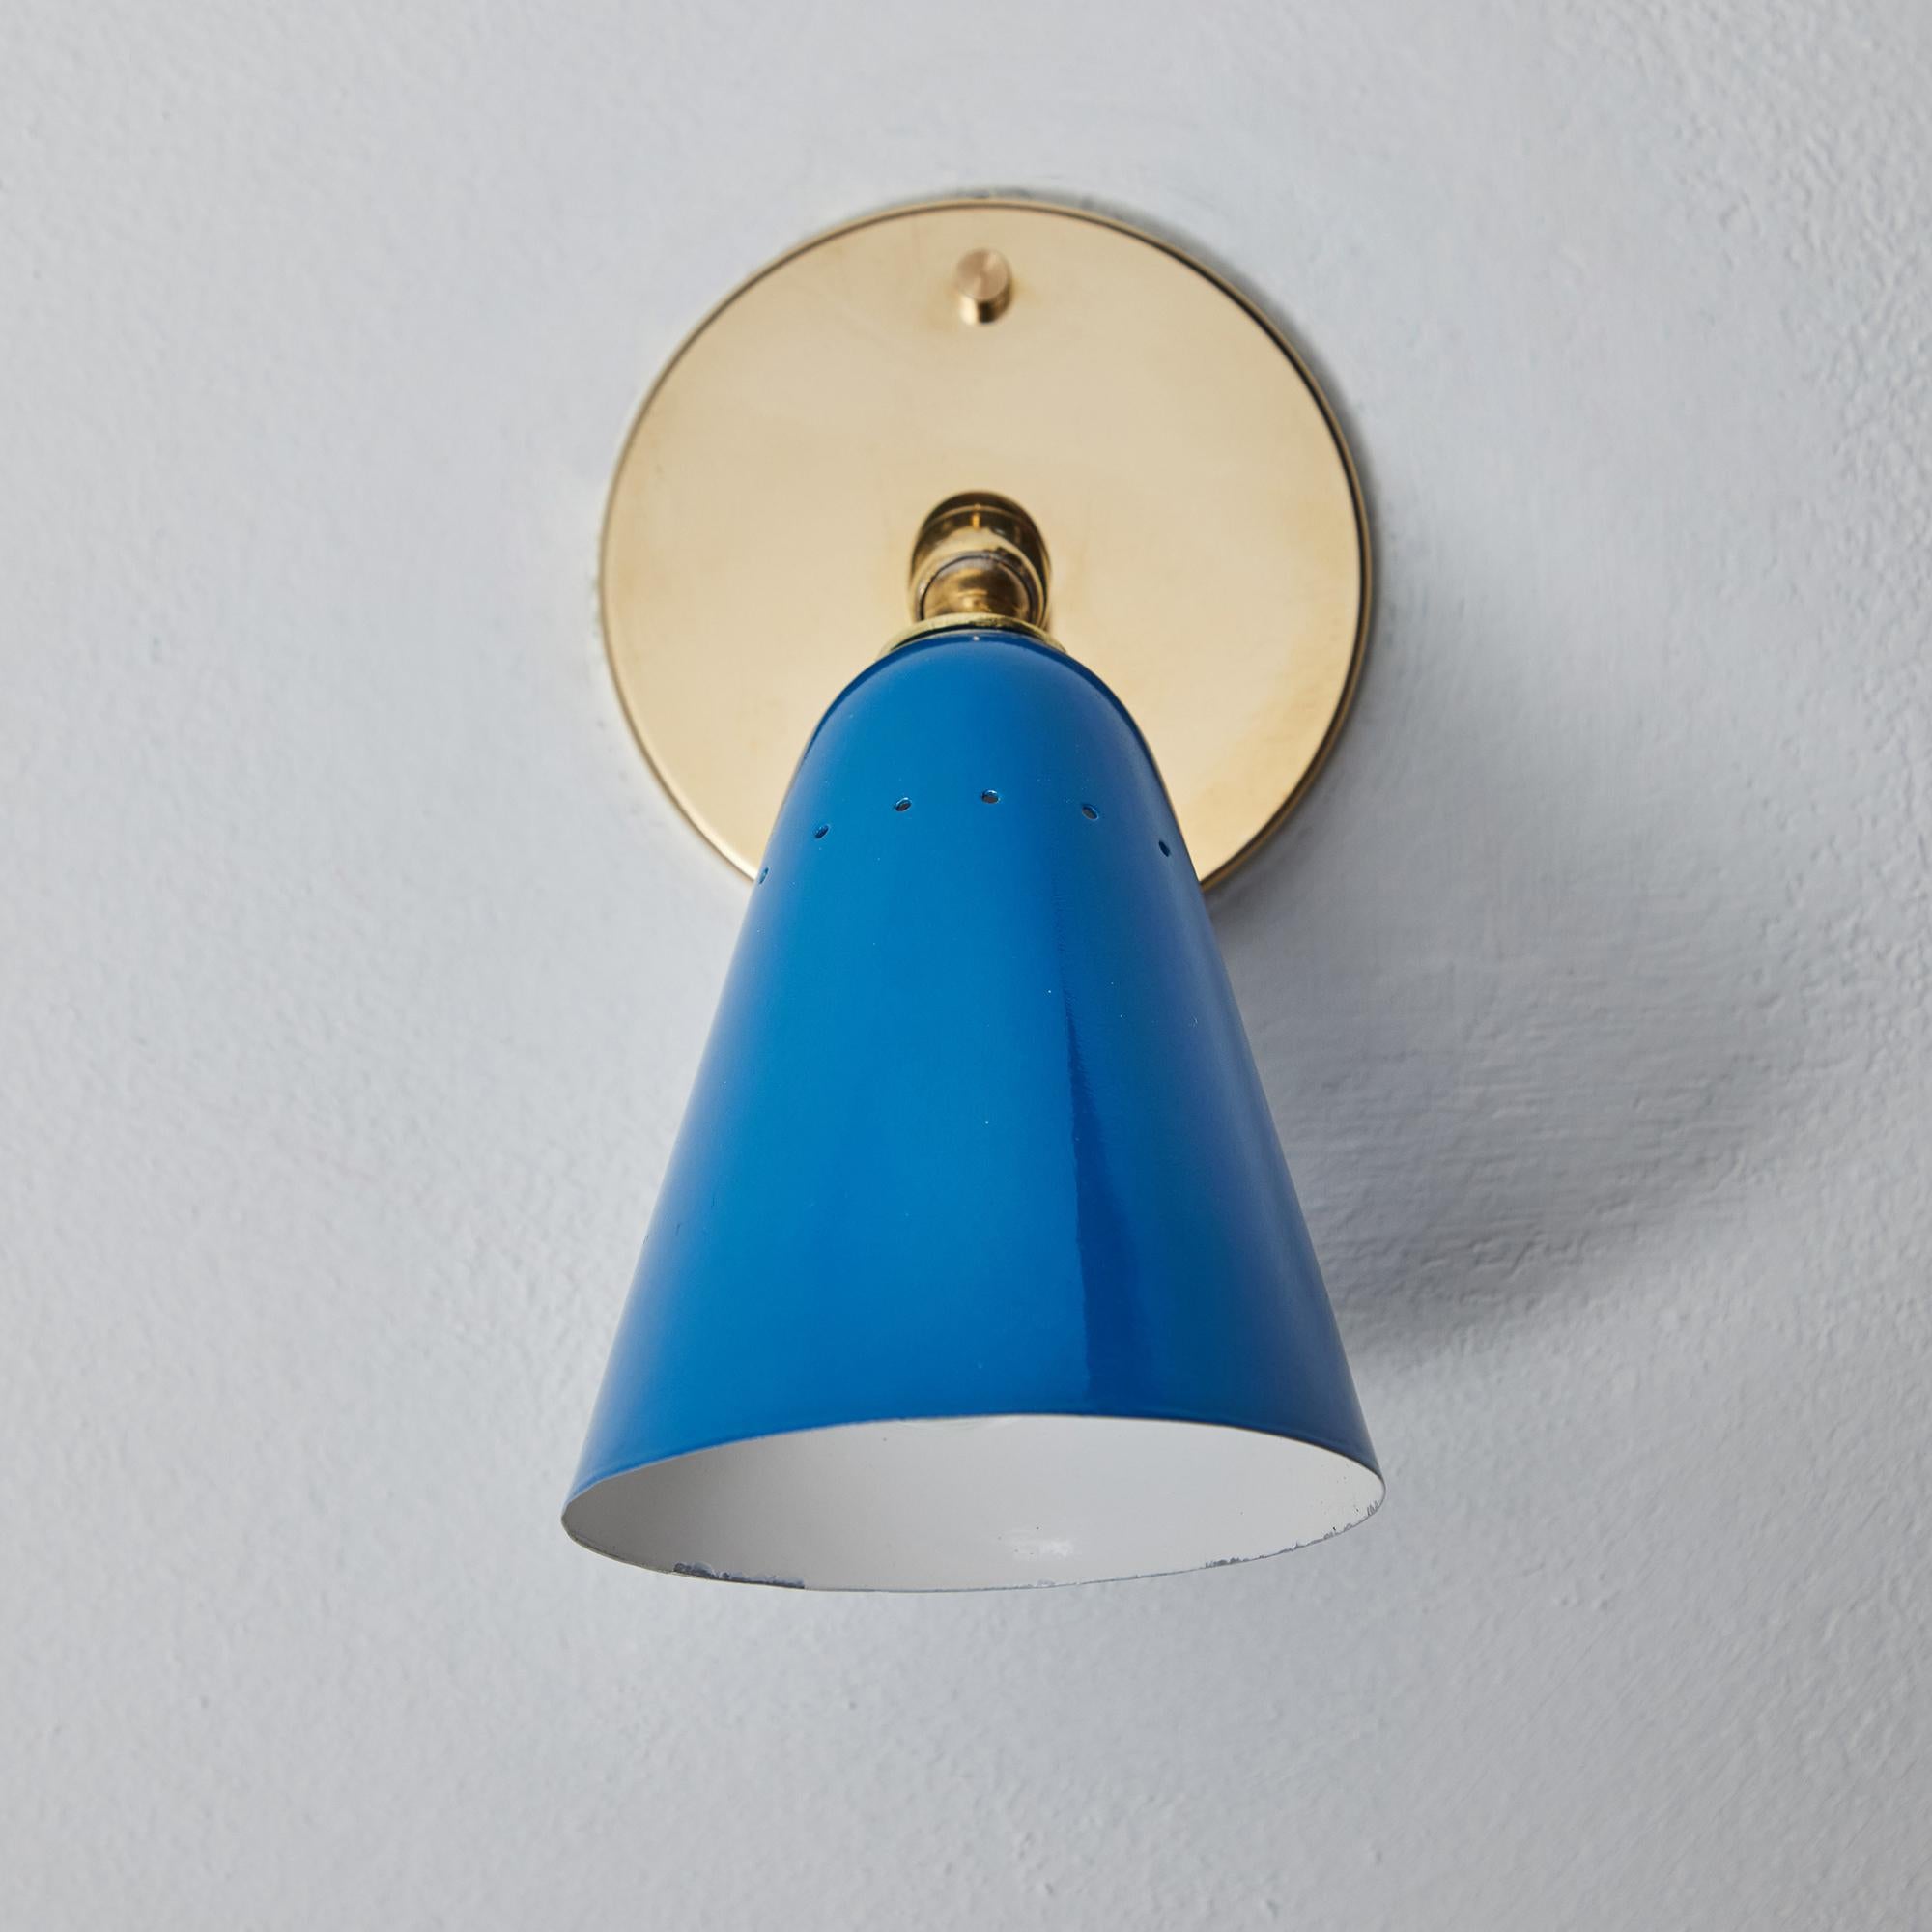 Mid-Century Modern 1960s Gino Sarfatti Model #26b Blue and Brass Wall Lamp for Arteluce For Sale